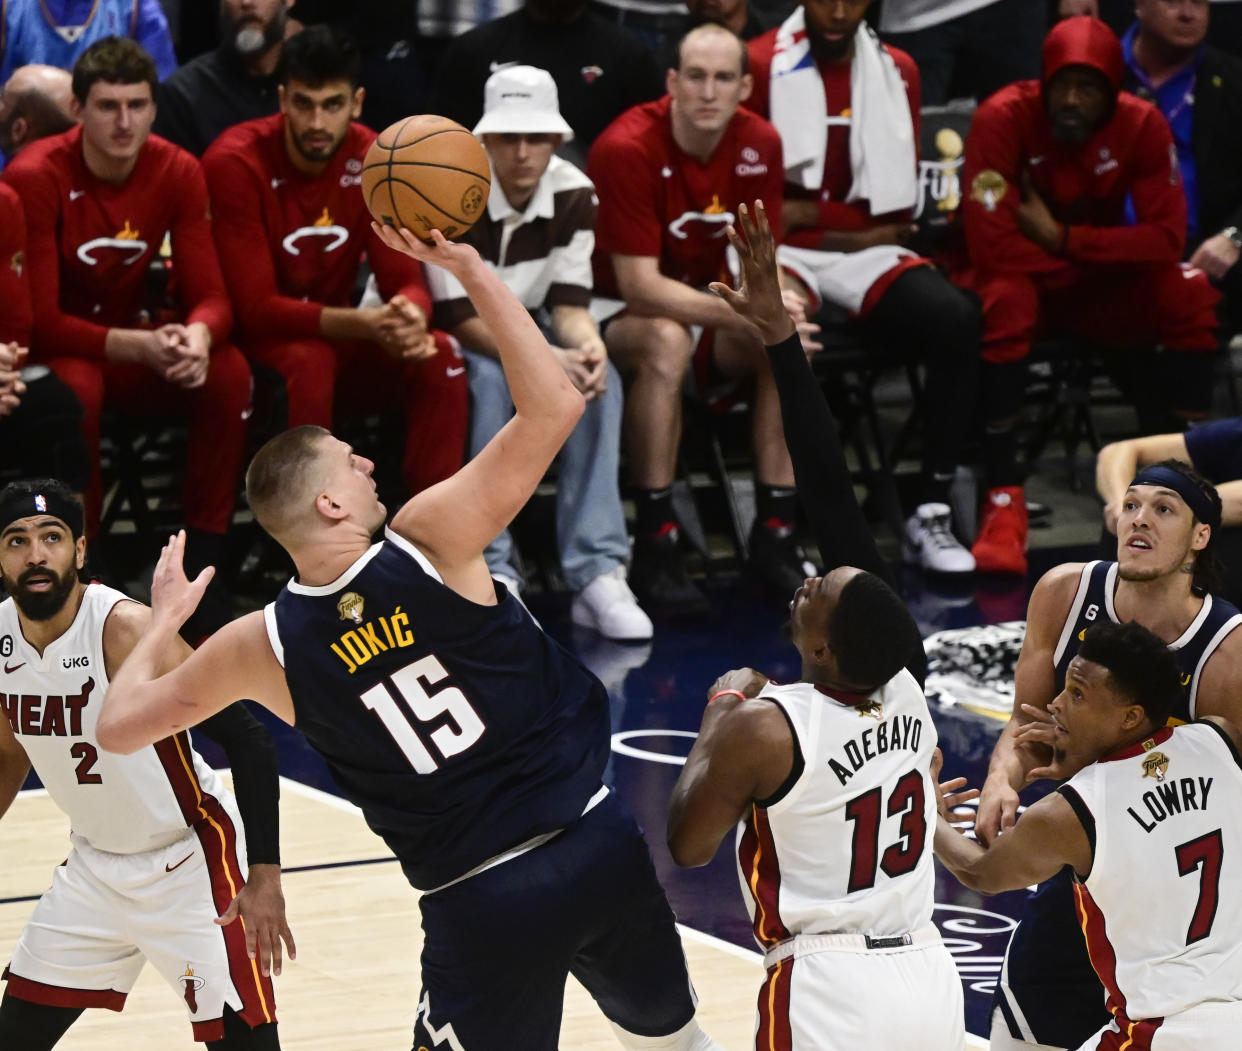 DENVER, CO - JUNE 04: Nikola Jokic (15) of the Denver Nuggets attempts a shot against Bam Adebayo (13) of the Miami Heat and Kyle Lowry (7) of the Miami Heat in the fourth quarter during Game 2 of the NBA Finals at Ball Arena June 04, 2023. (Photo by Andy Cross/MediaNews Group/The Denver Post via Getty Images)